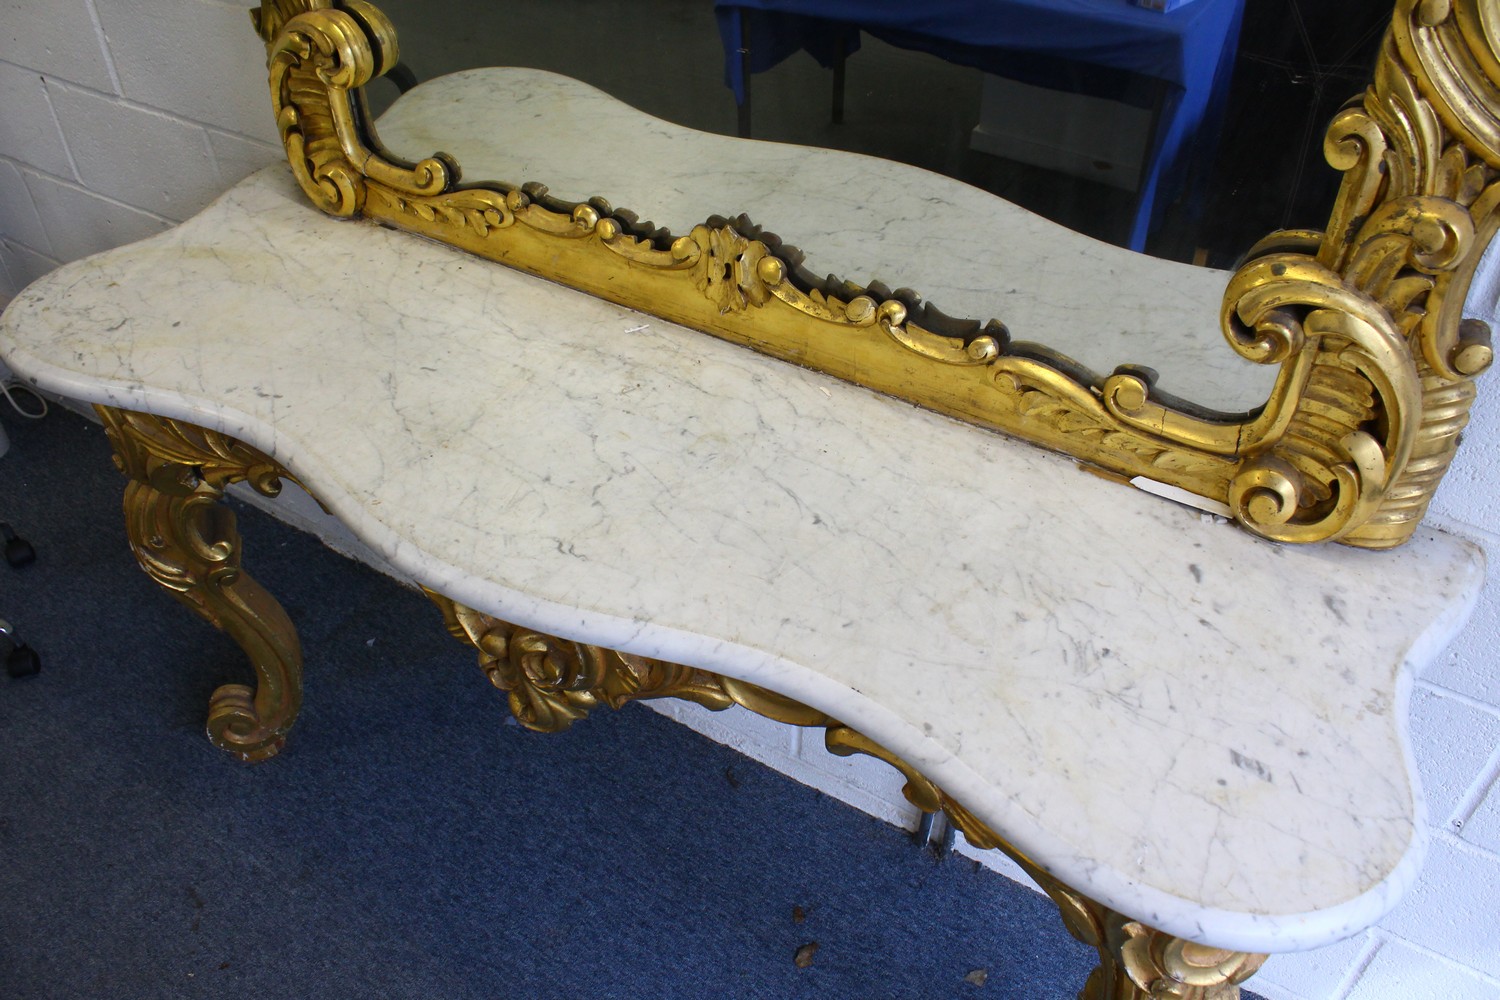 A SUPERB LARGE 18TH-19TH CENTURY ITALIAN CARVED AND GILDED CONSOLE AND MIRROR, the mirror carved - Image 6 of 7